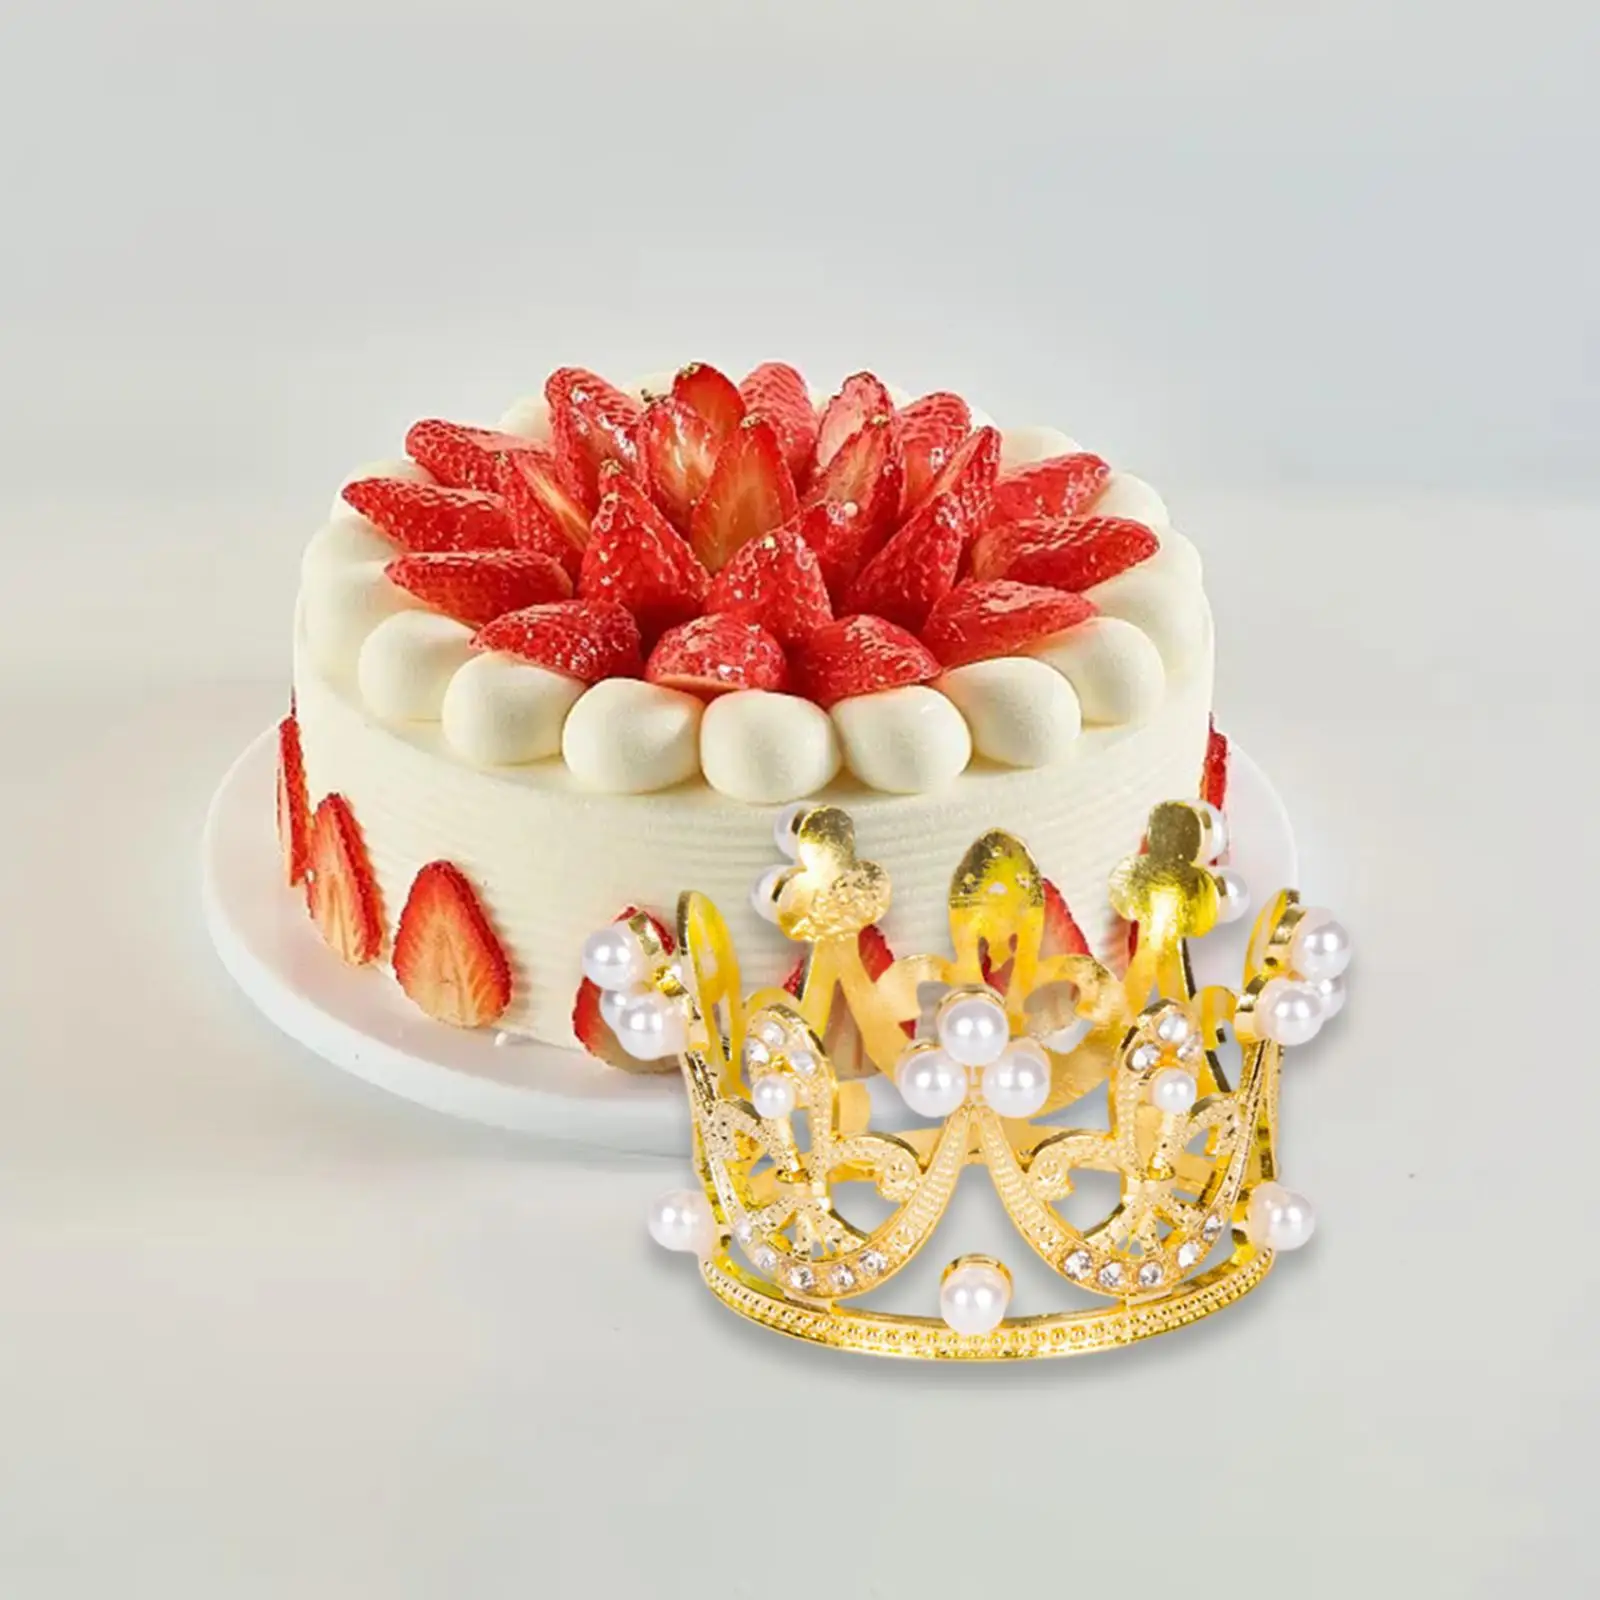 Crown Cake Topper Fashion Gift Costume Photo Prop Headdress Cake Topper for Themed Parties Birthday Wedding Supplies